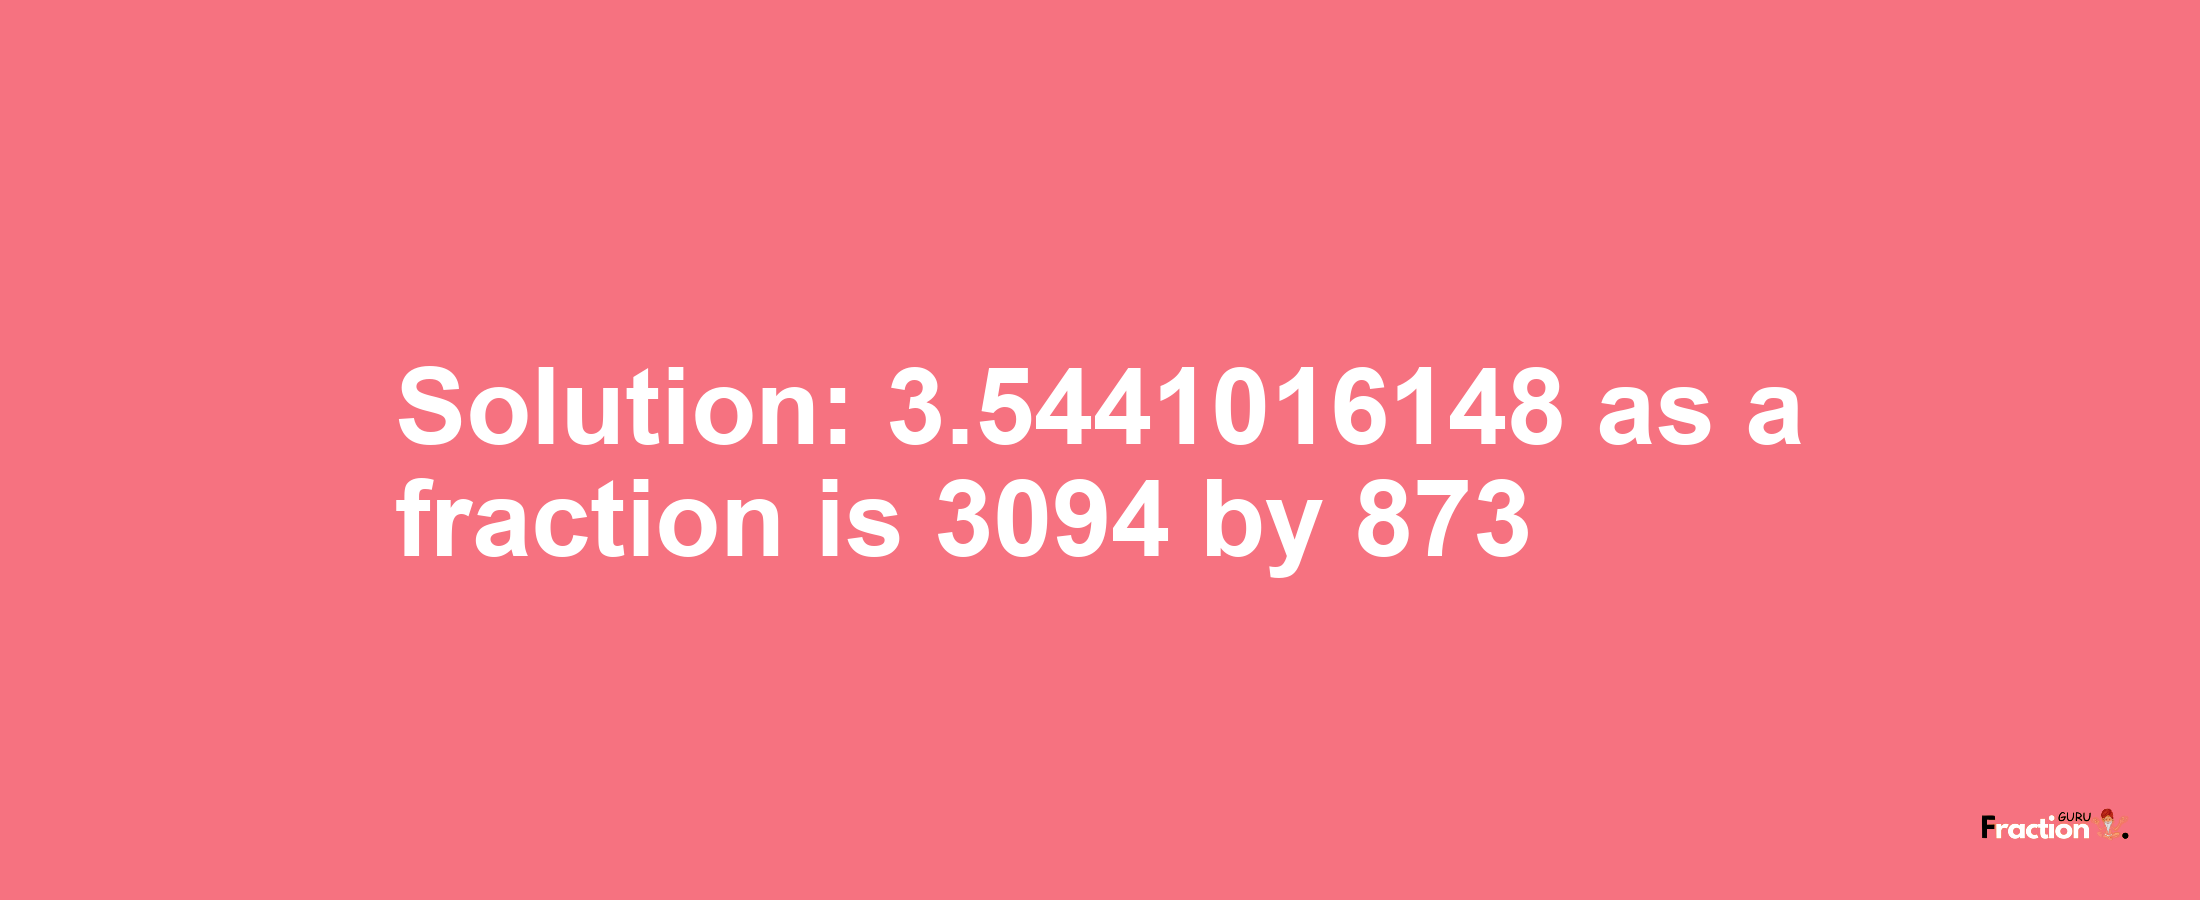 Solution:3.5441016148 as a fraction is 3094/873